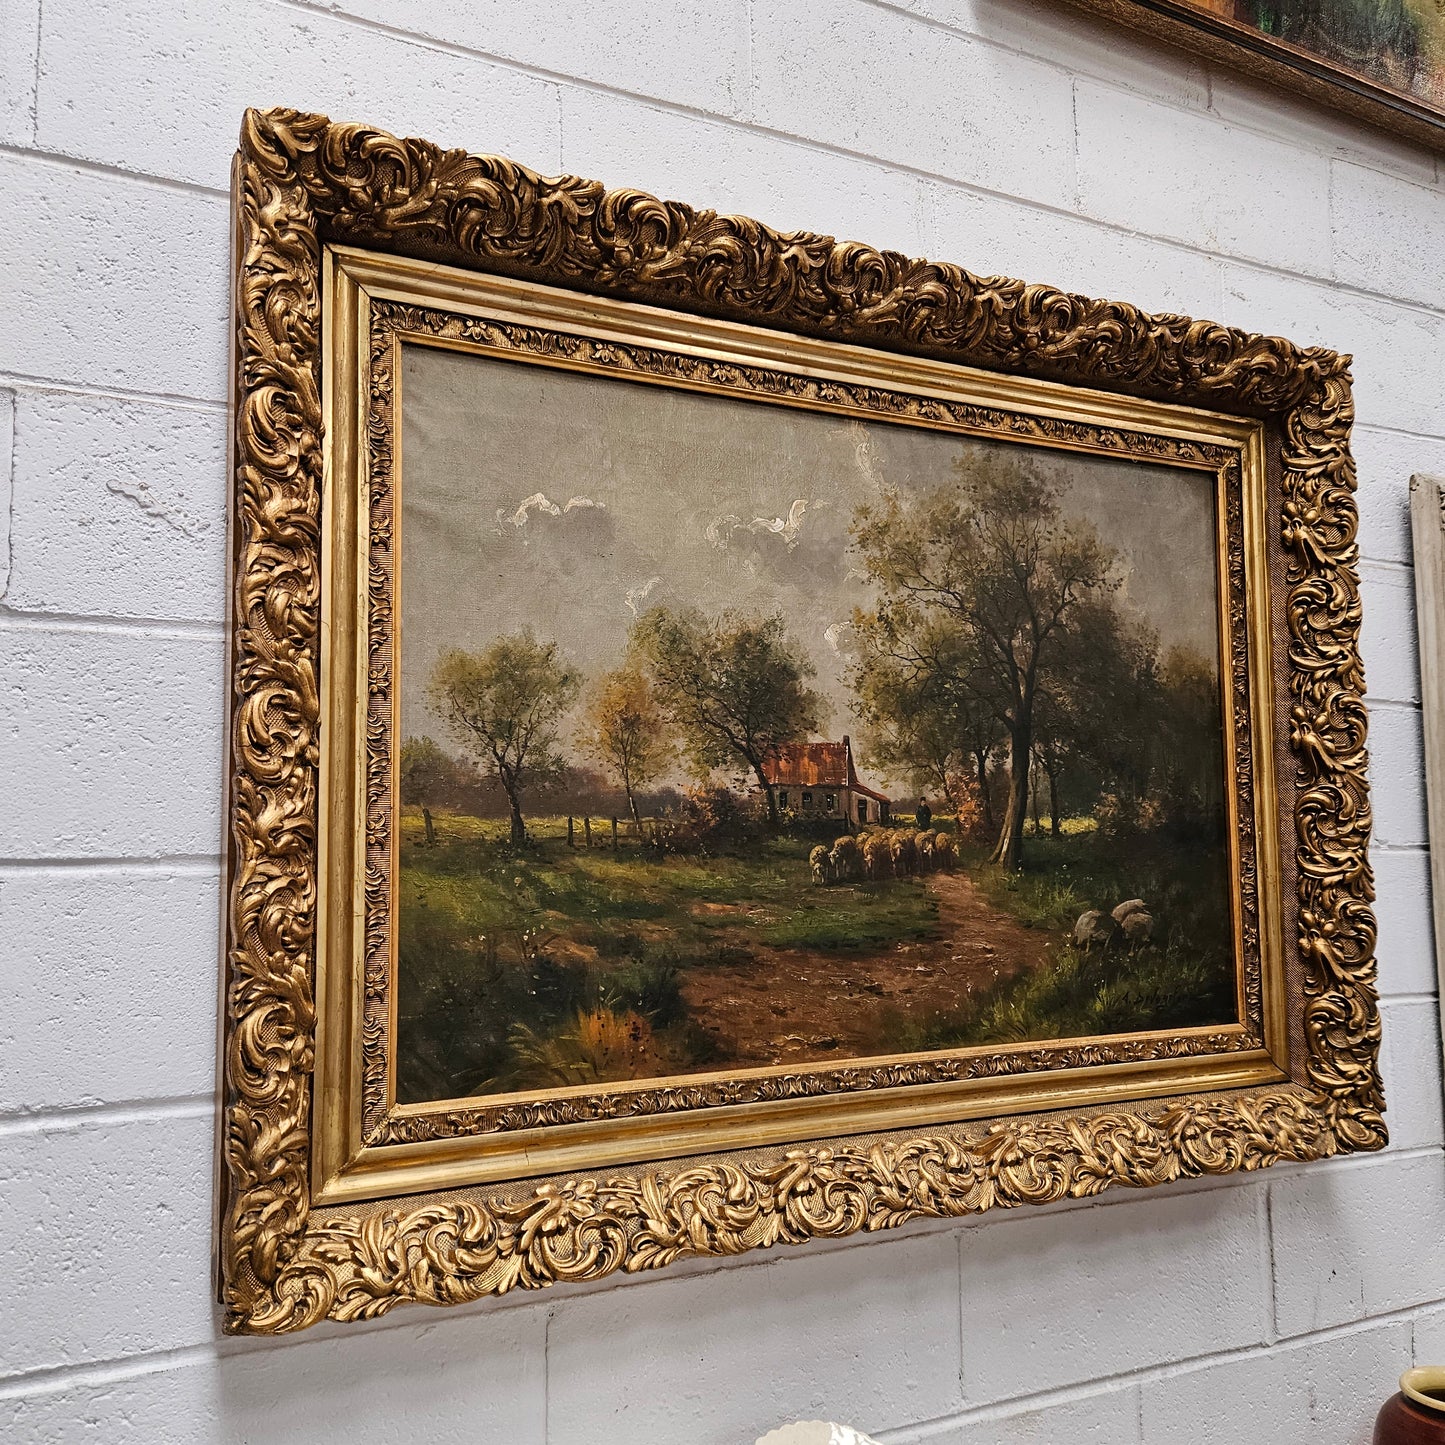 Beautiful Dutch oil on canvas painting sourced in France. Pretty country scene with sheep in an ornate decorative frame and signed by the artist. In good original detailed condition. Please see photos as they form part of the description.